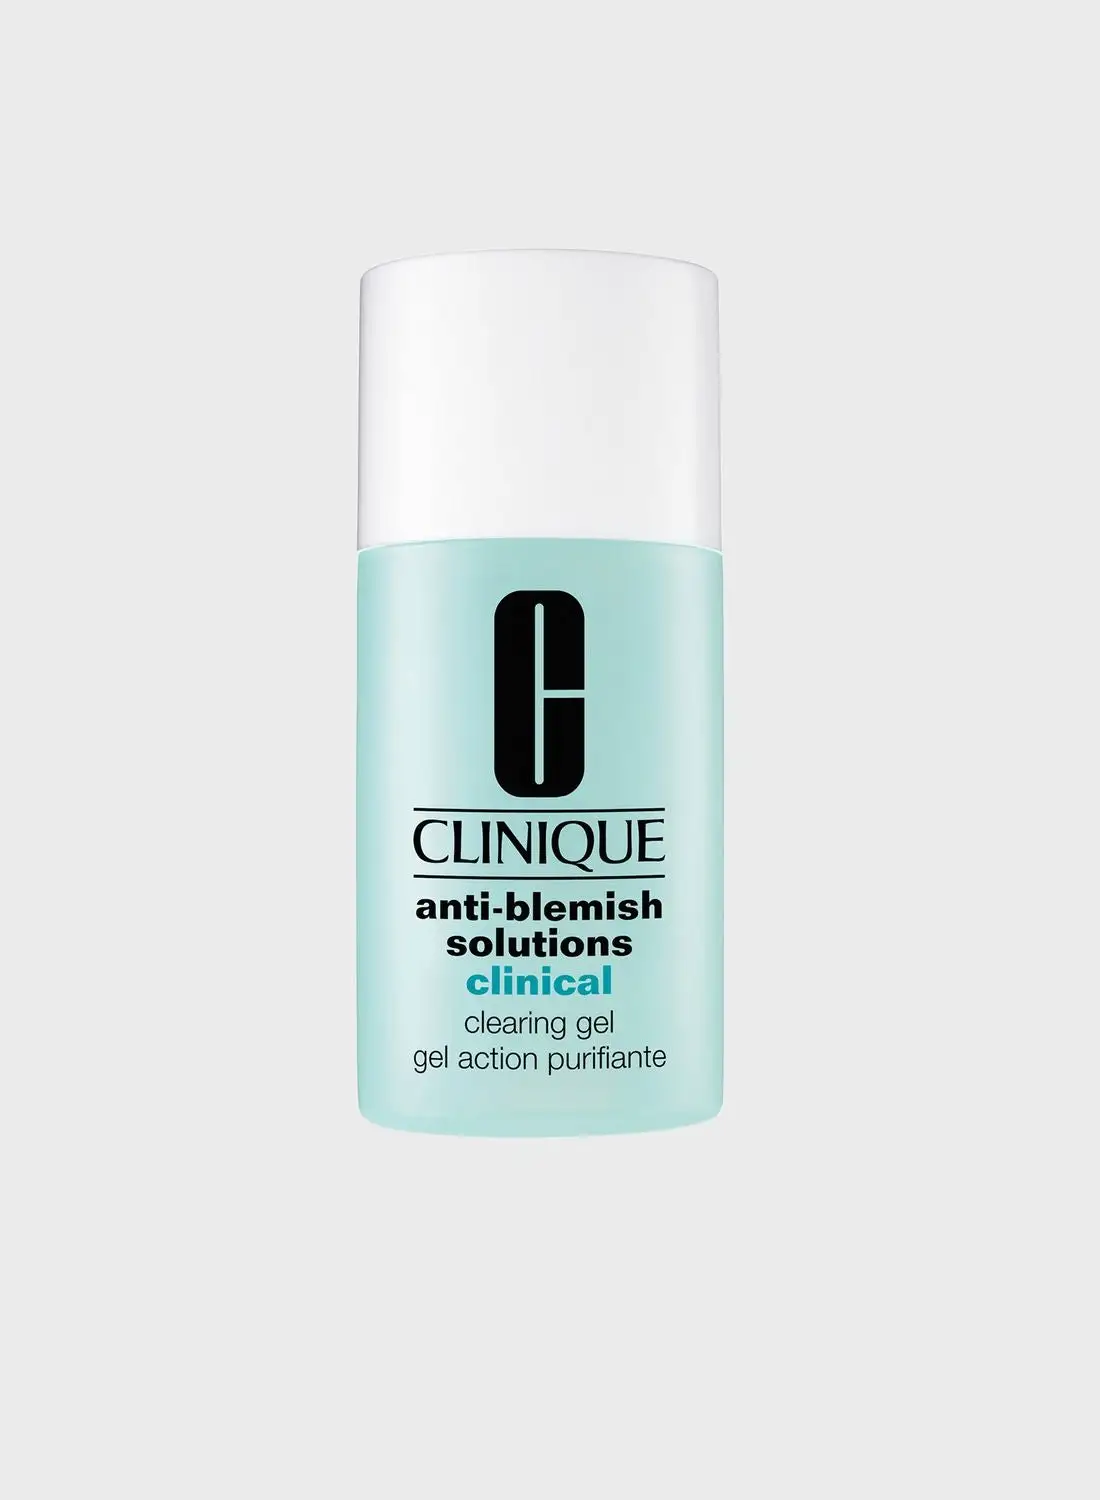 CLINIQUE Anti-Blemish Solutions Clinical Clearing Gel 30ml